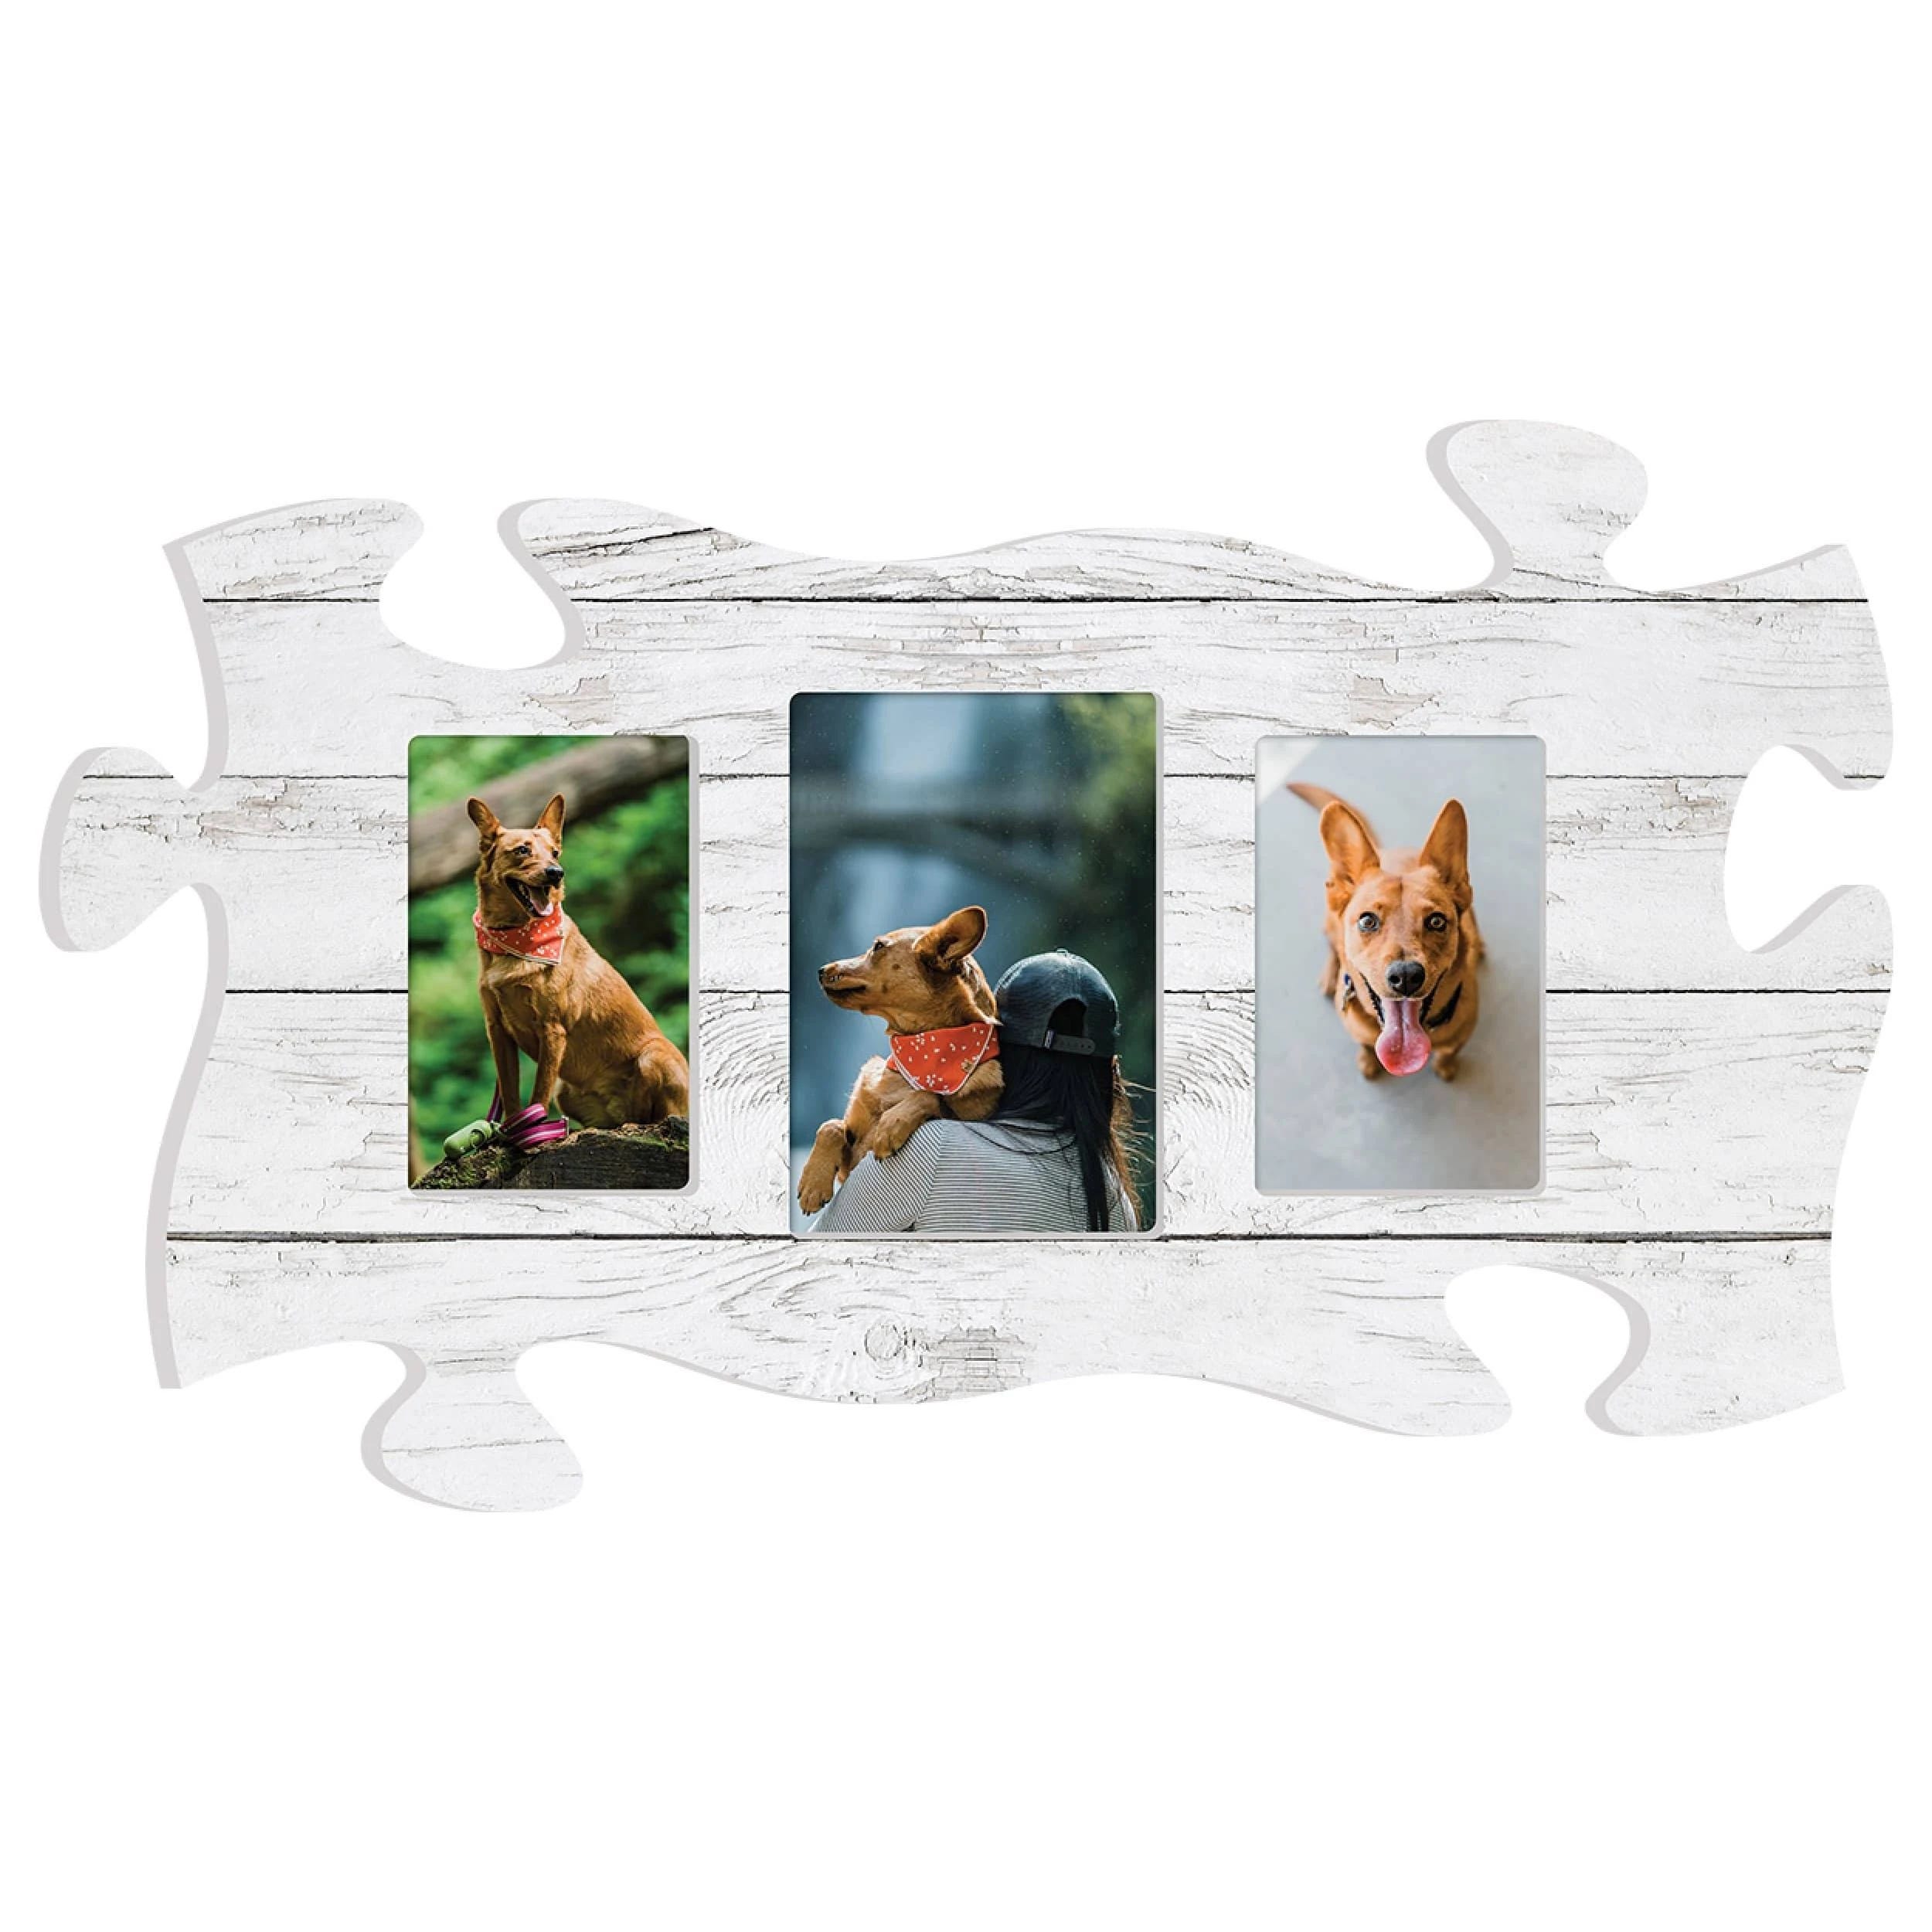 Creative 3 Picture Frame for Inspirational Decor | Image